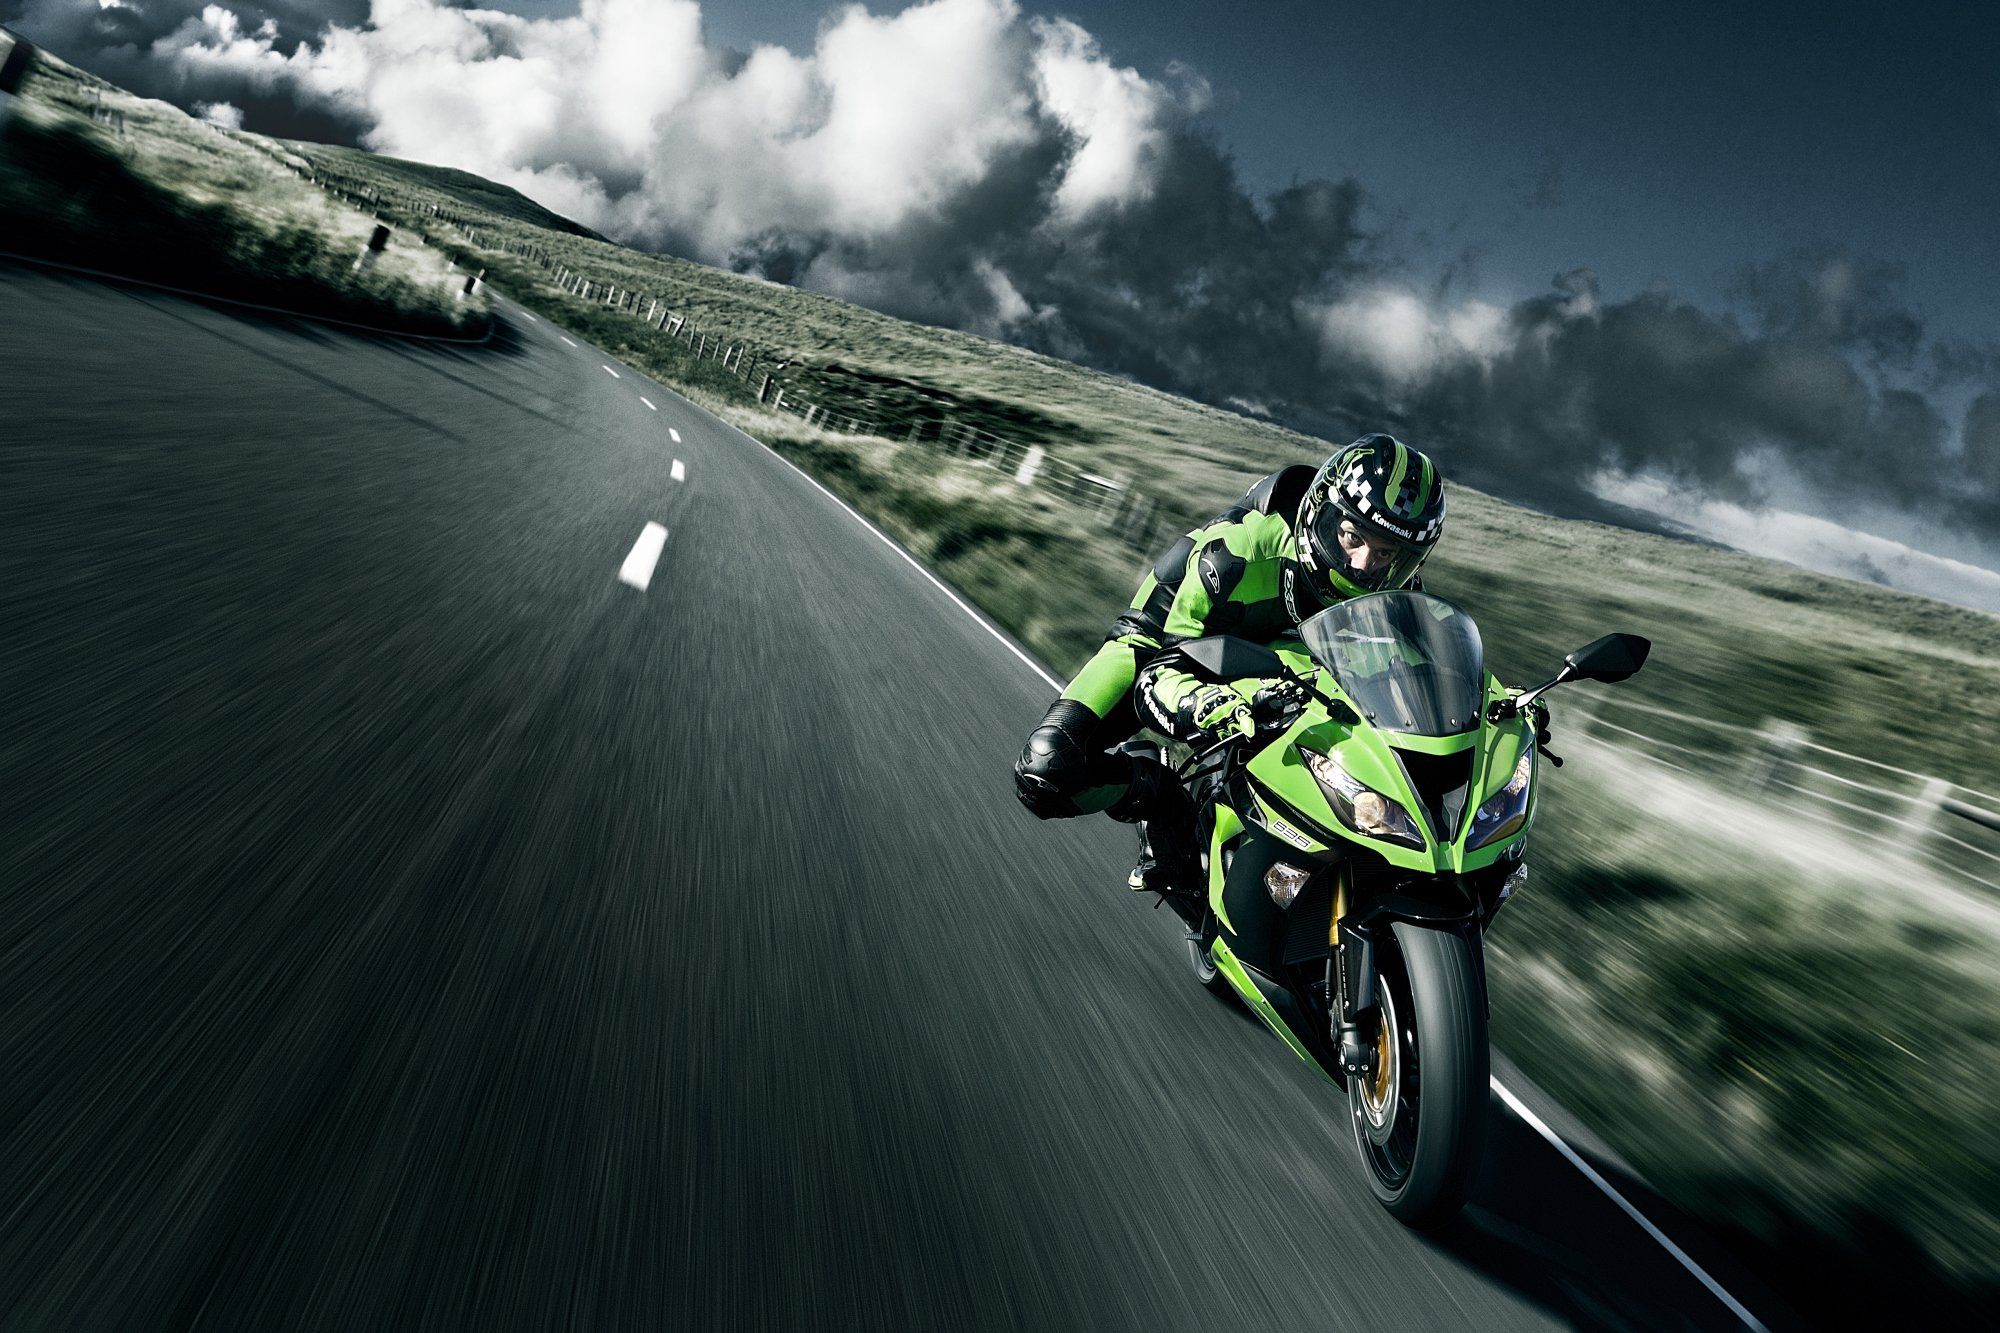 ZX-10R Wallpapers - Wallpaper Cave